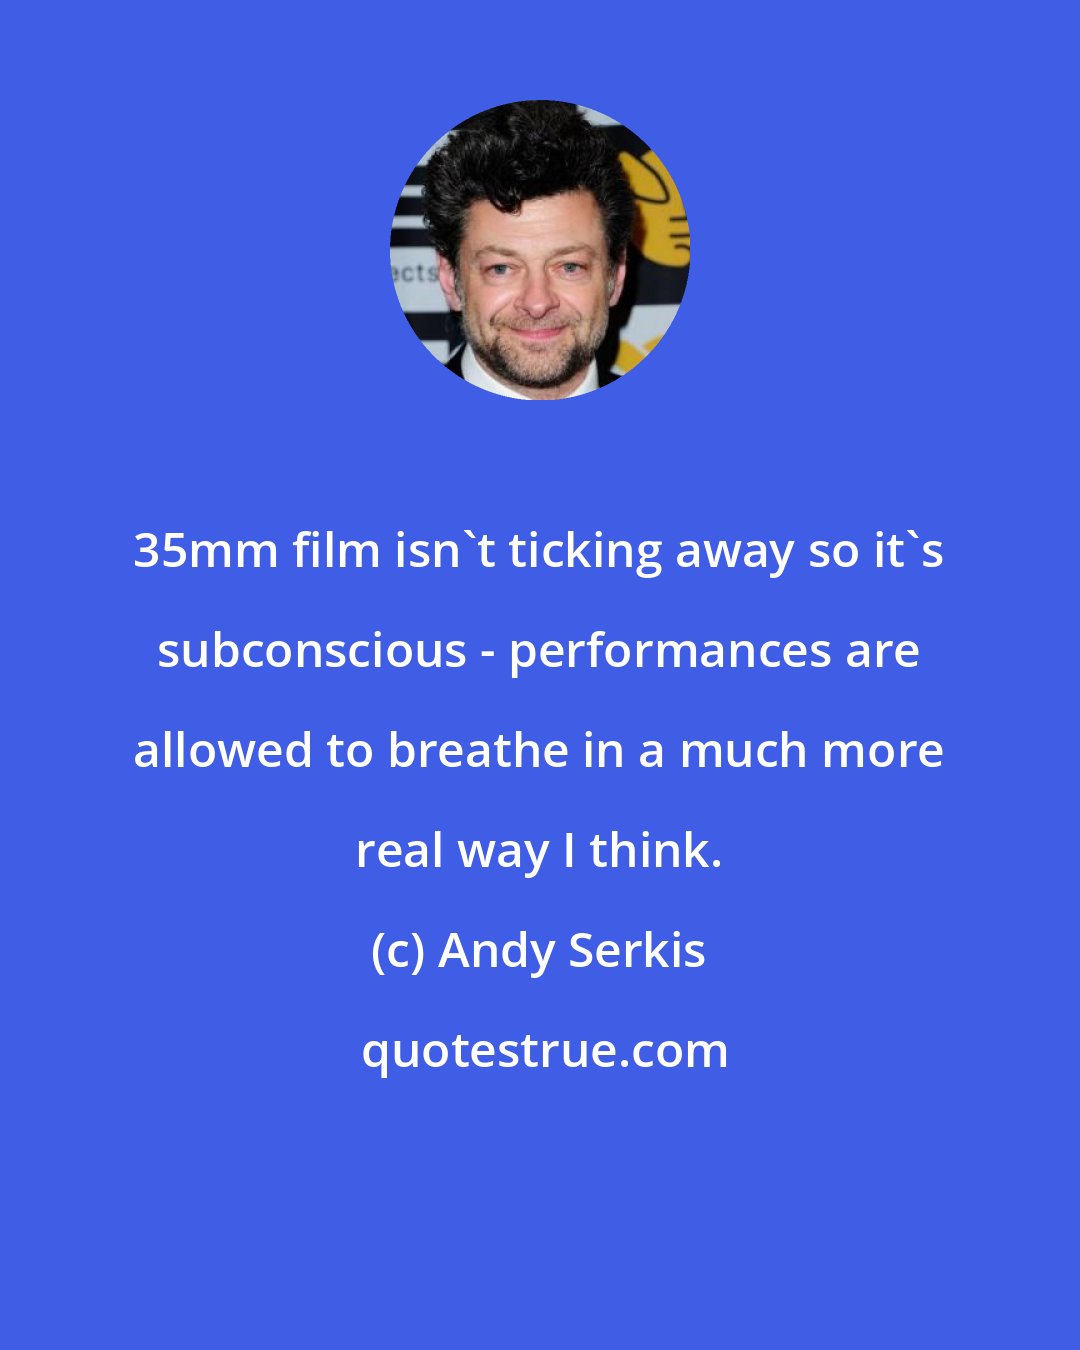 Andy Serkis: 35mm film isn't ticking away so it's subconscious - performances are allowed to breathe in a much more real way I think.